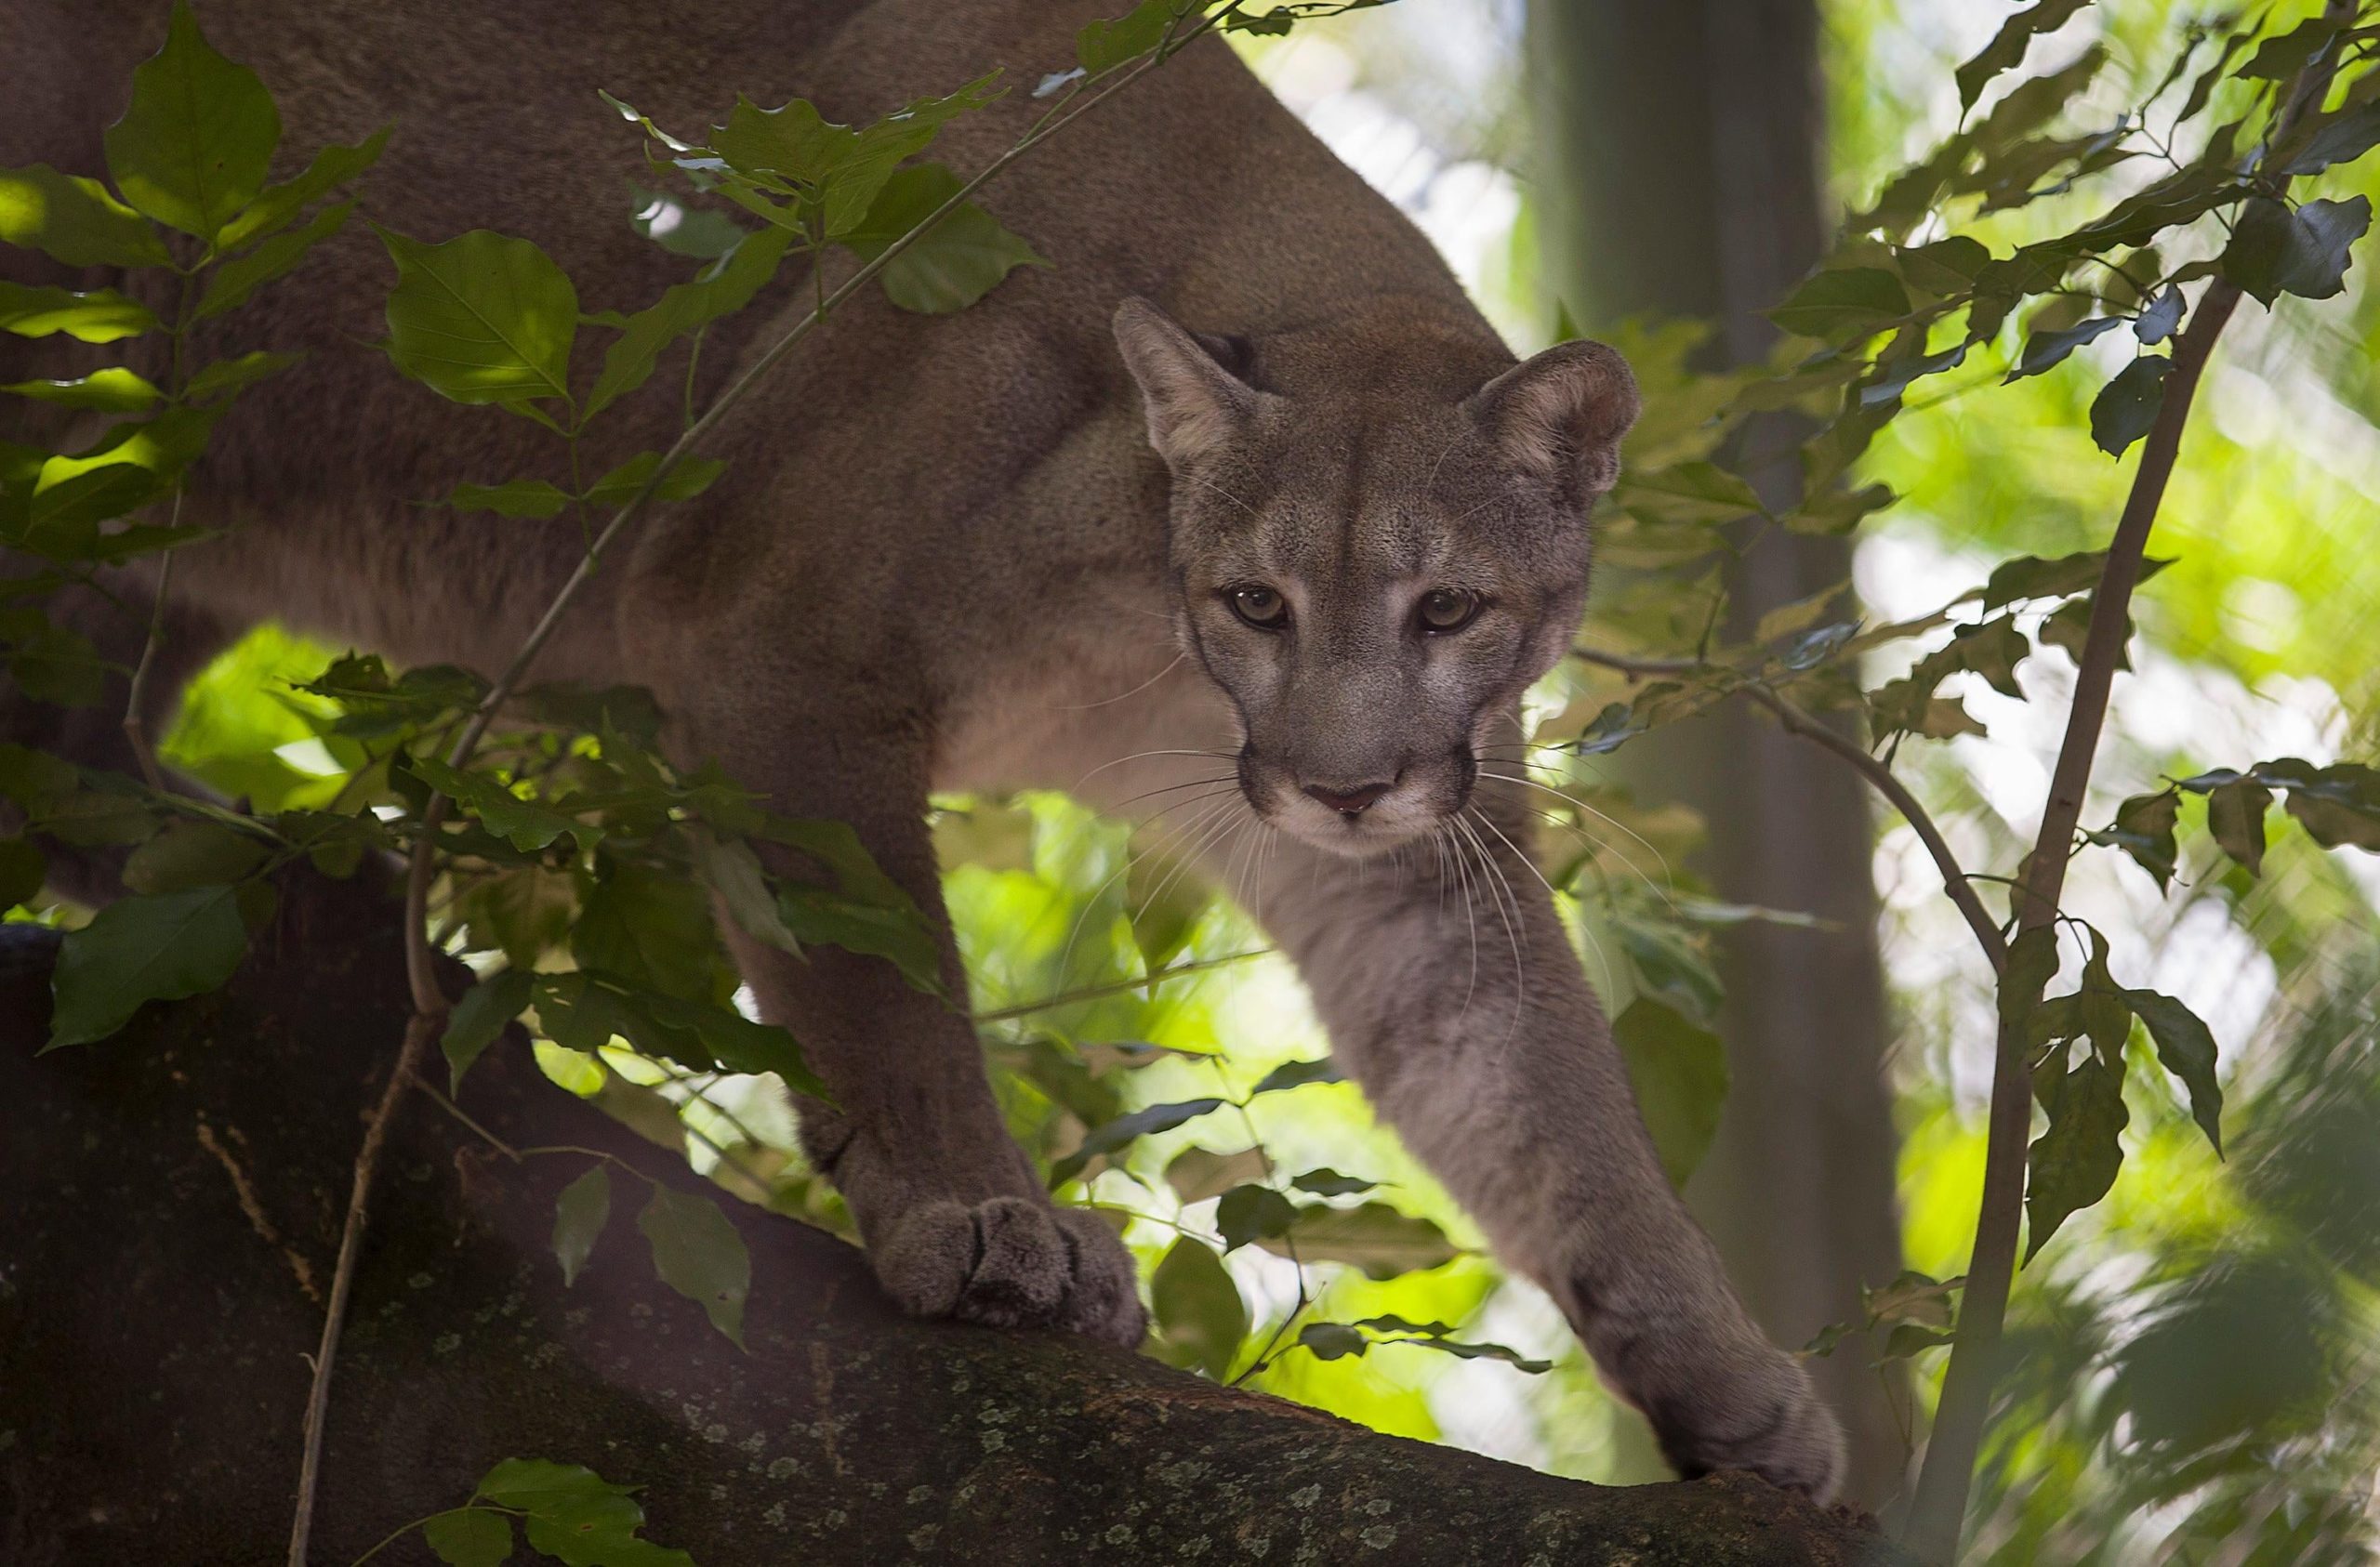 An endangered Florida panther in 2019 at the Palm Beach Zoo. (Photo: Joe Raedle, Getty Images)